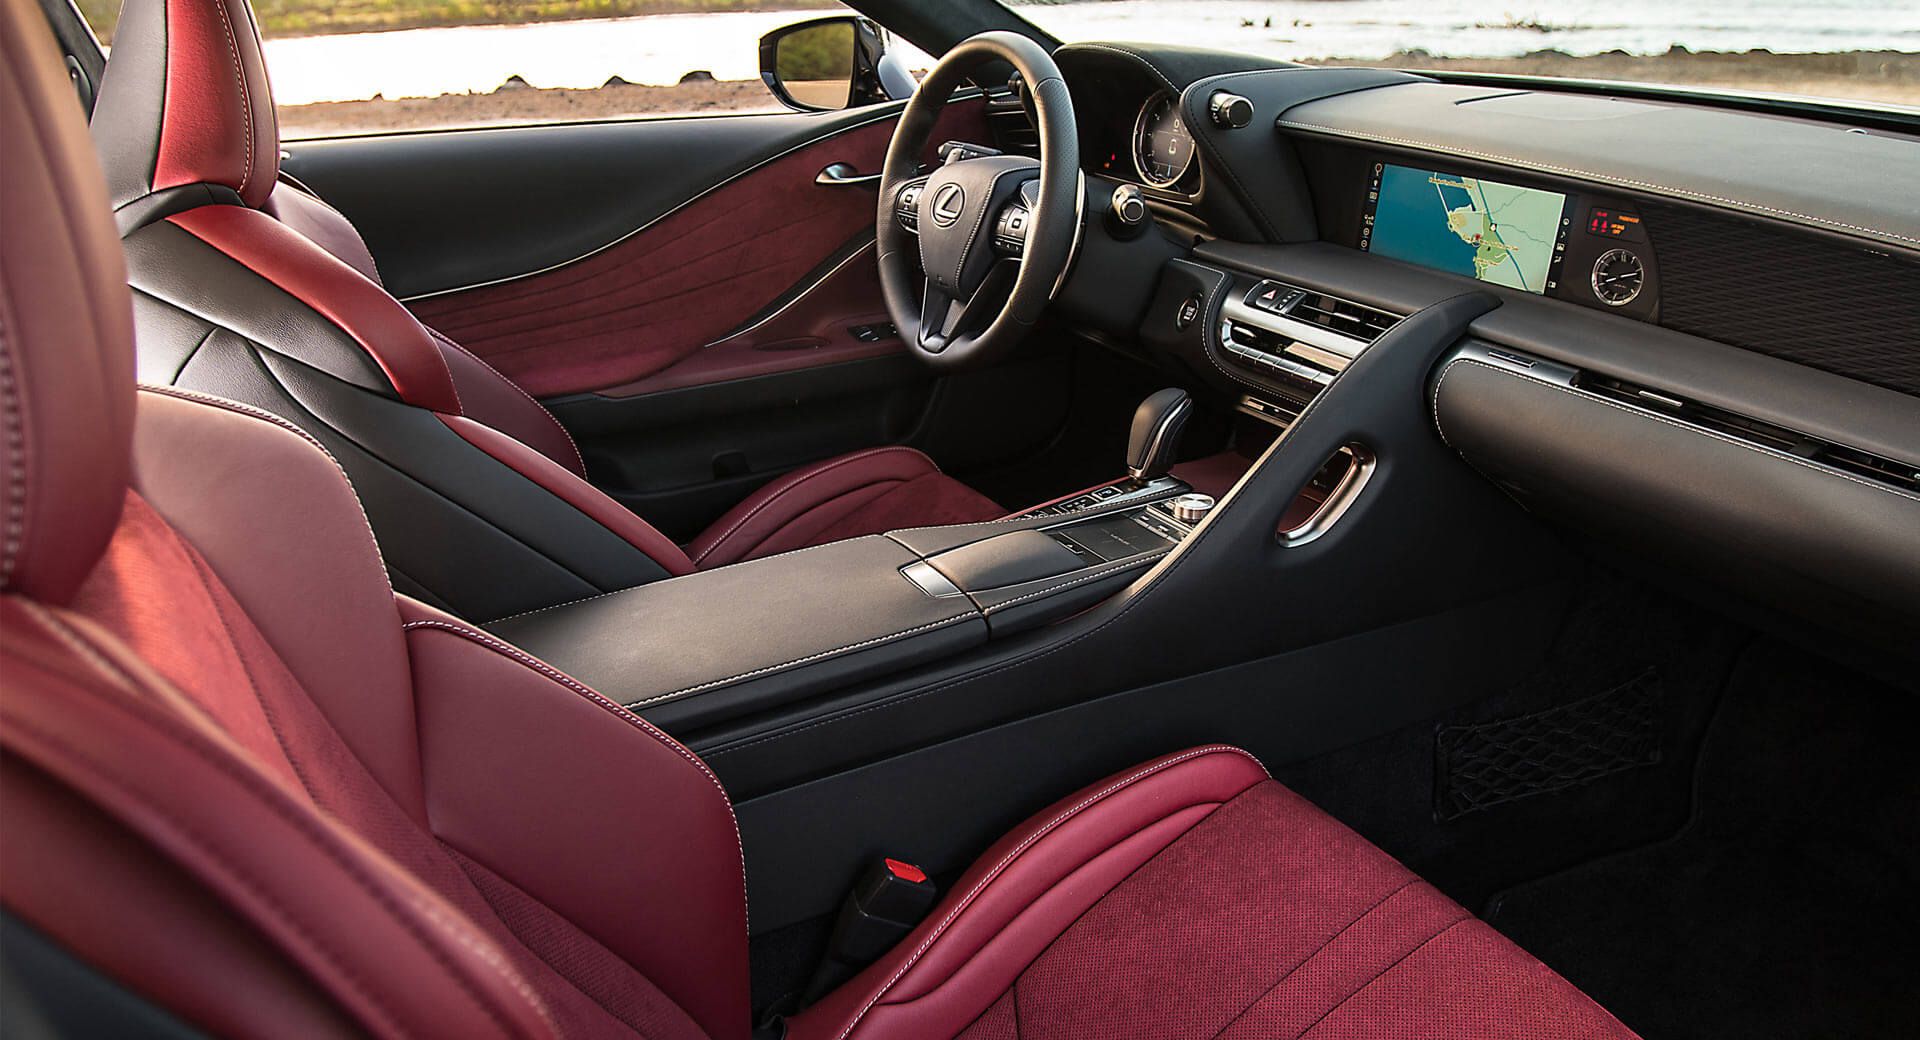 Alcantara Upholstery Is So Popular, The Company Can't Keep Up With Demand